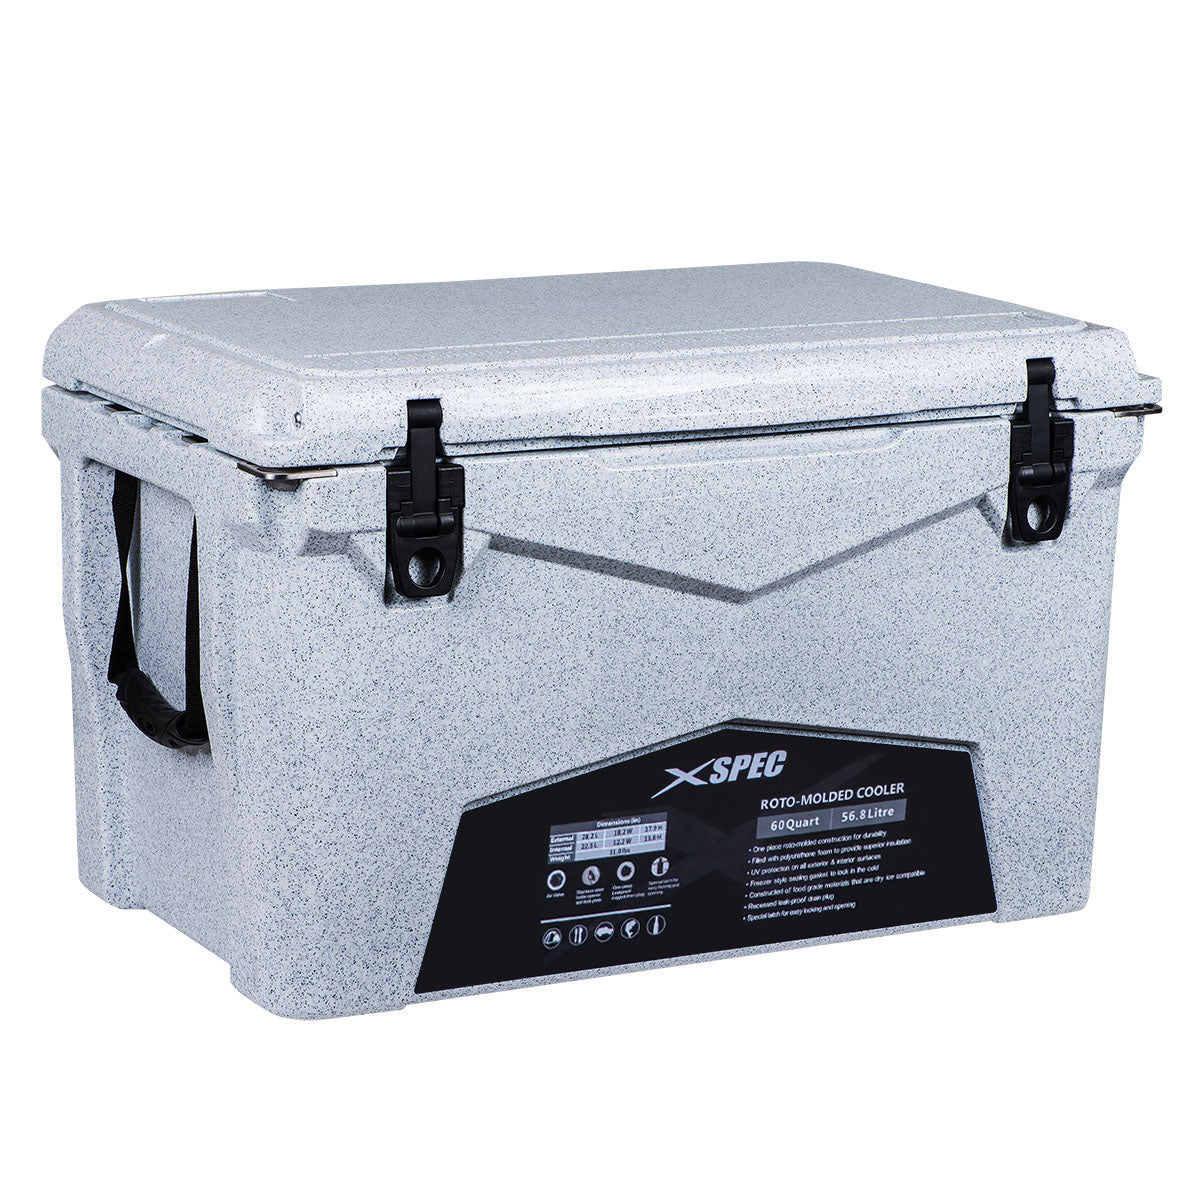 Xspec 45 Quart Towable Roto Molded Ice Chest Outdoor Cooler with Wheels, Sand